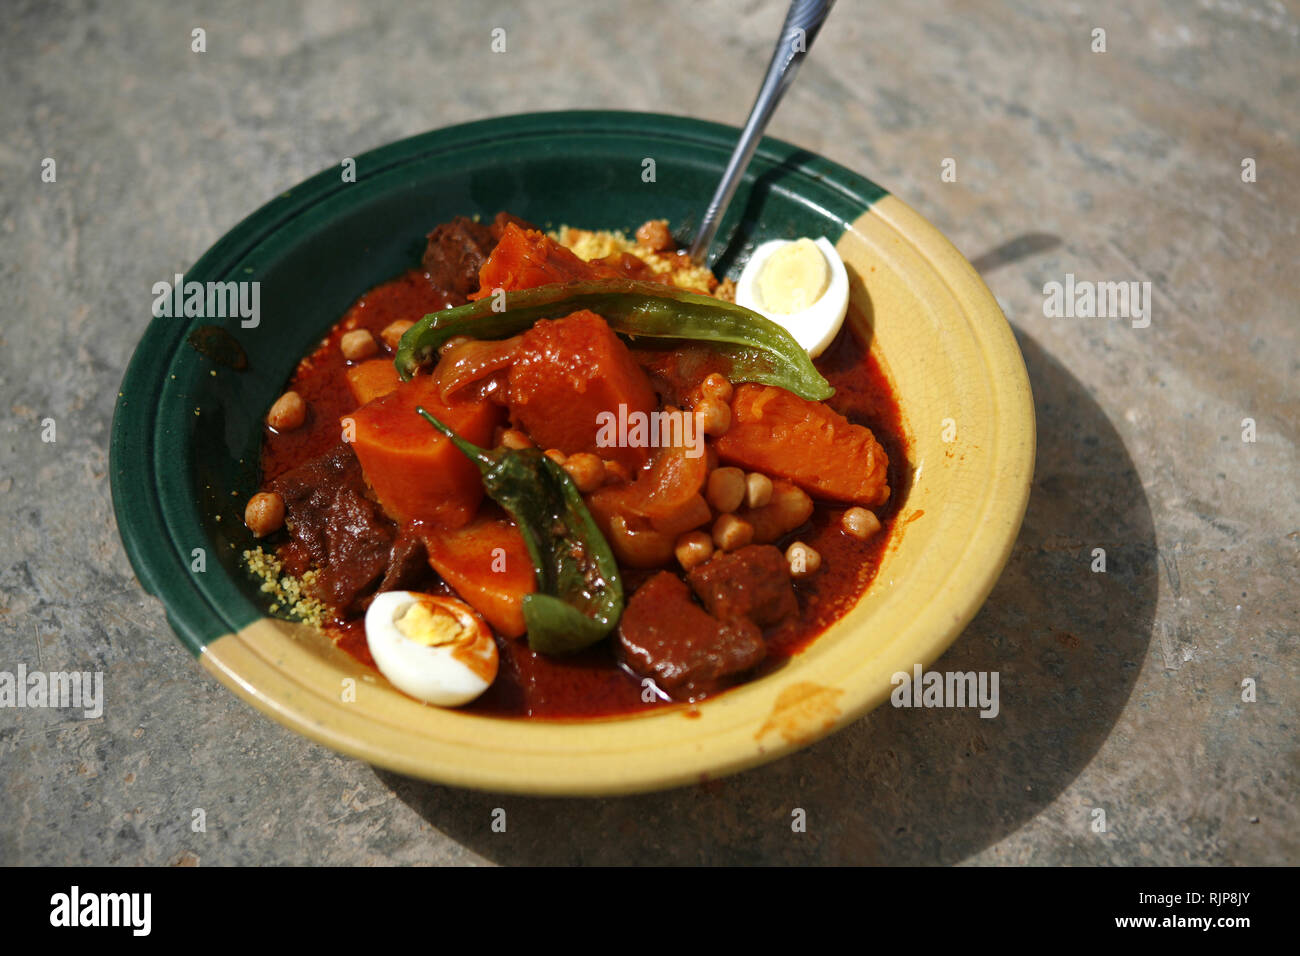 Traditional Tunisian food, couscous Stock Photo